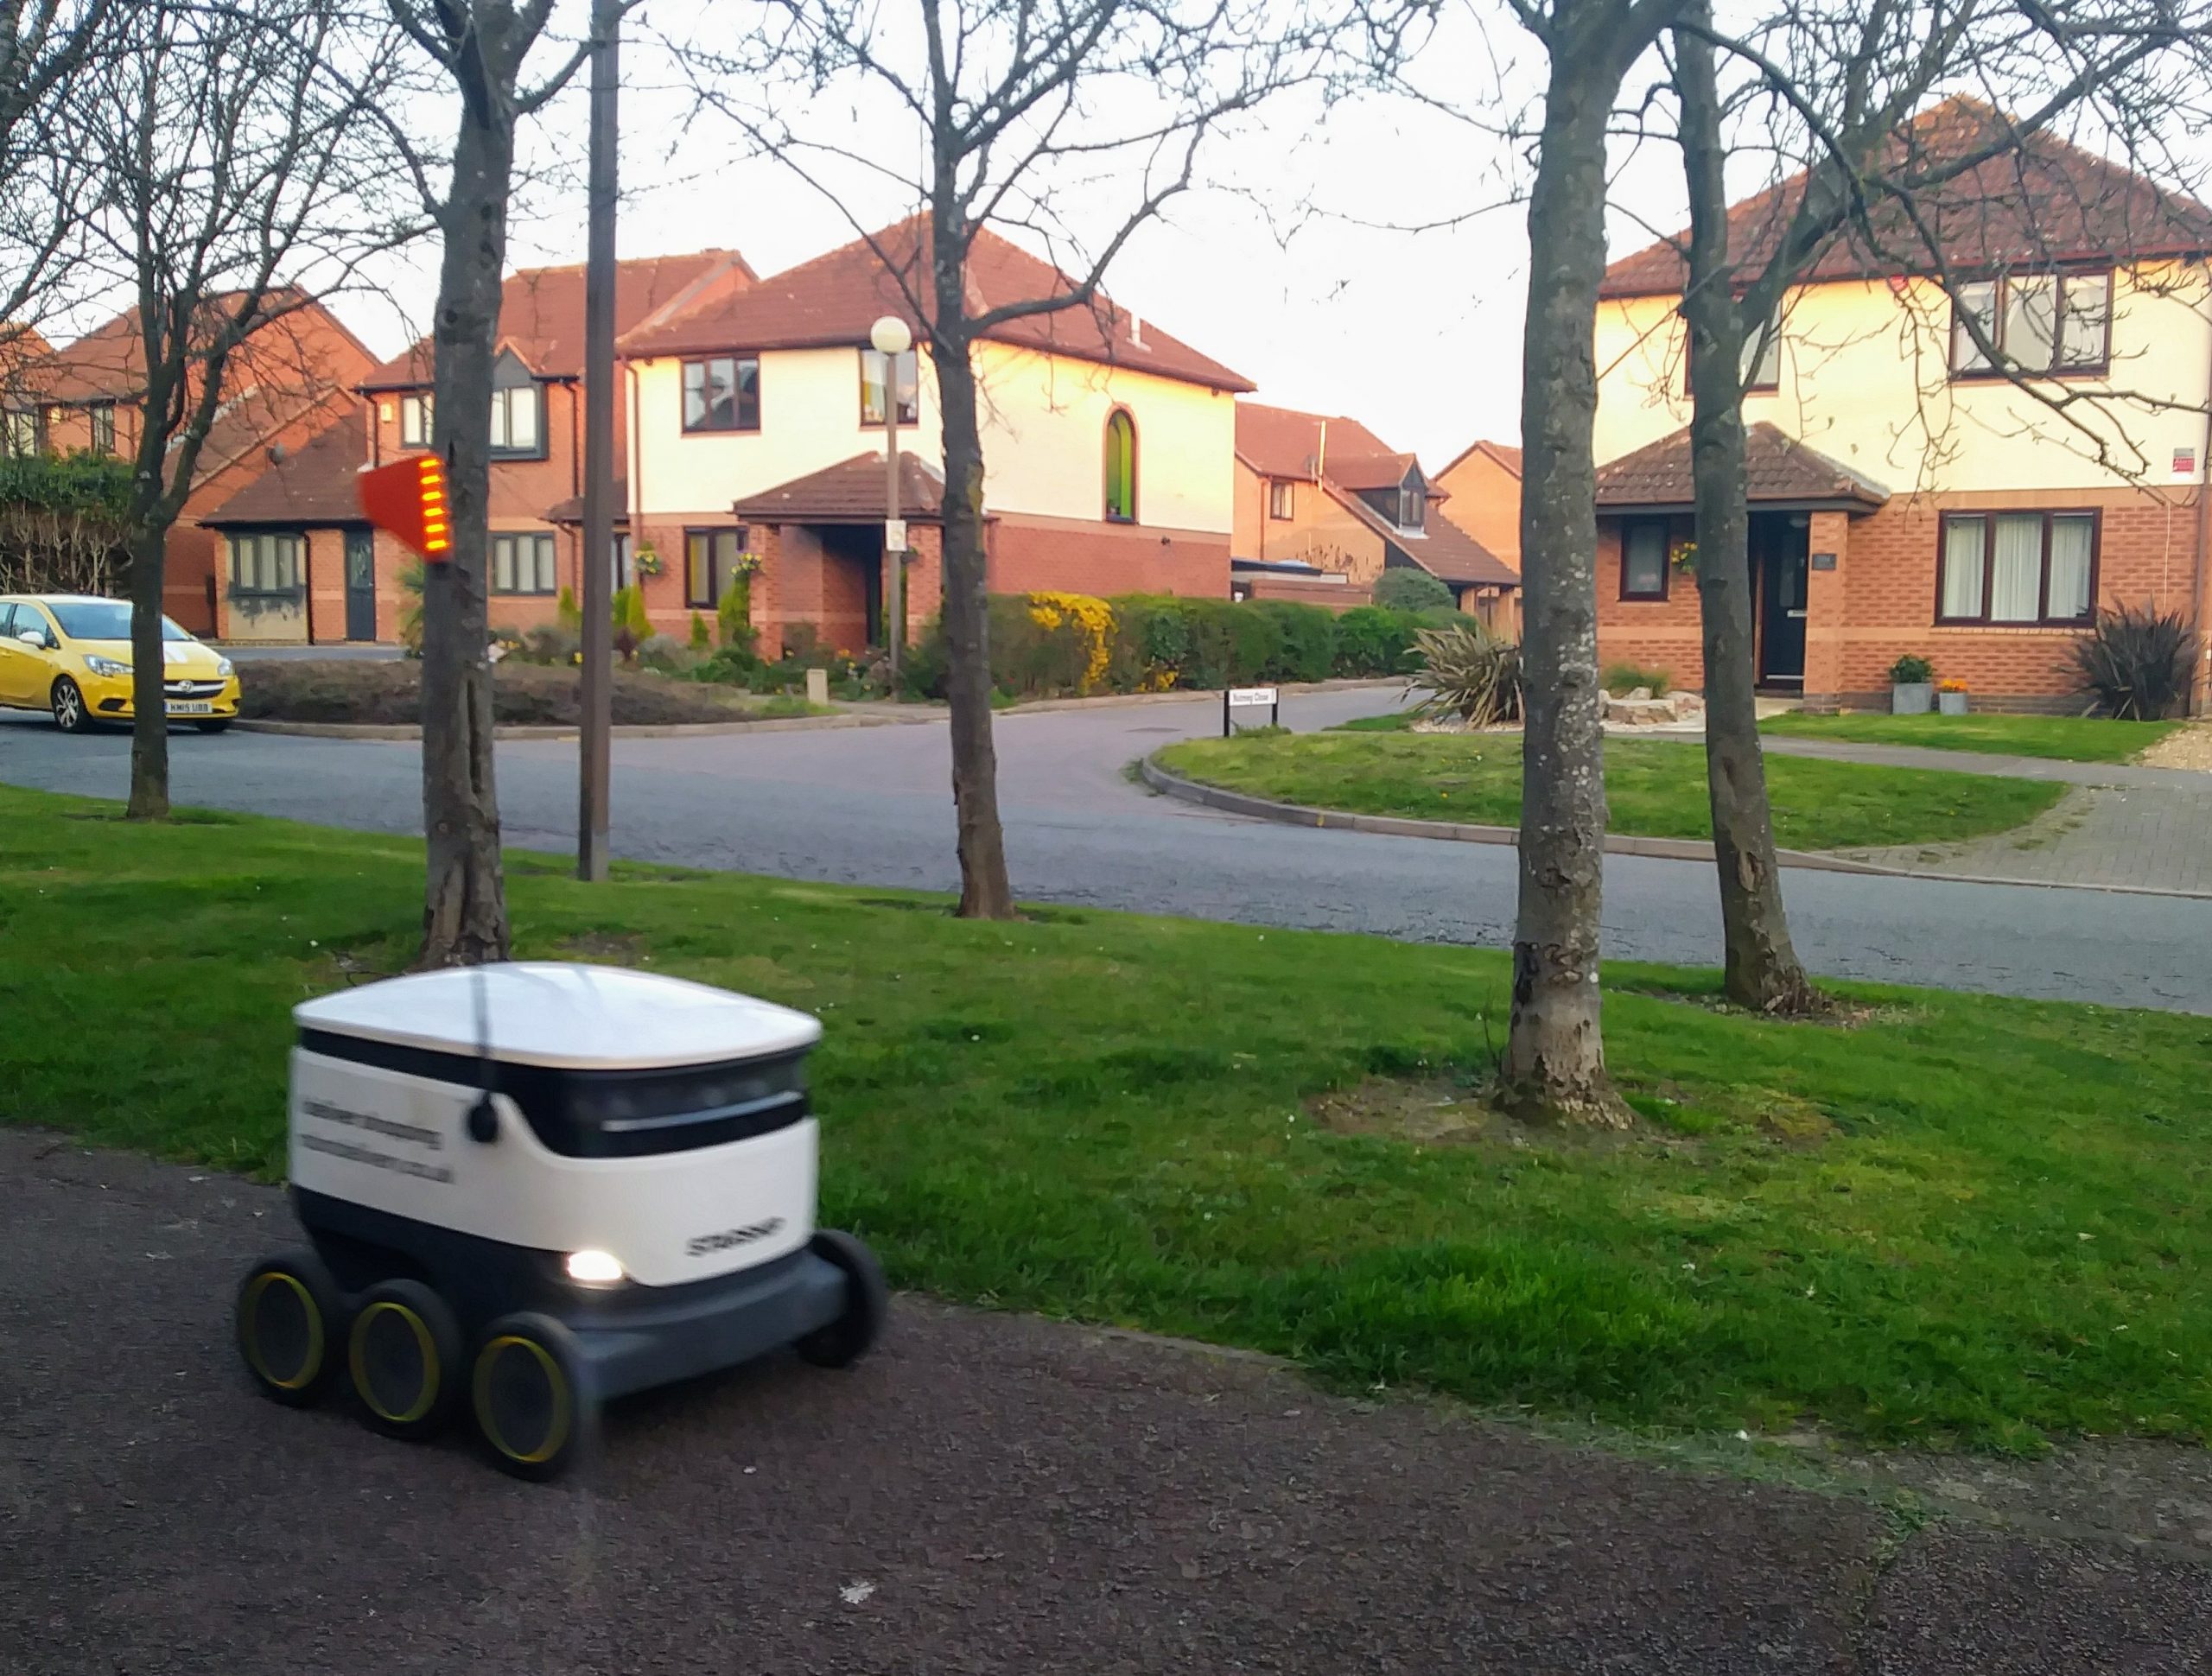 'Starship' delivery robot on a pavement in Milton Keynes with some trees and suburban houses in the background